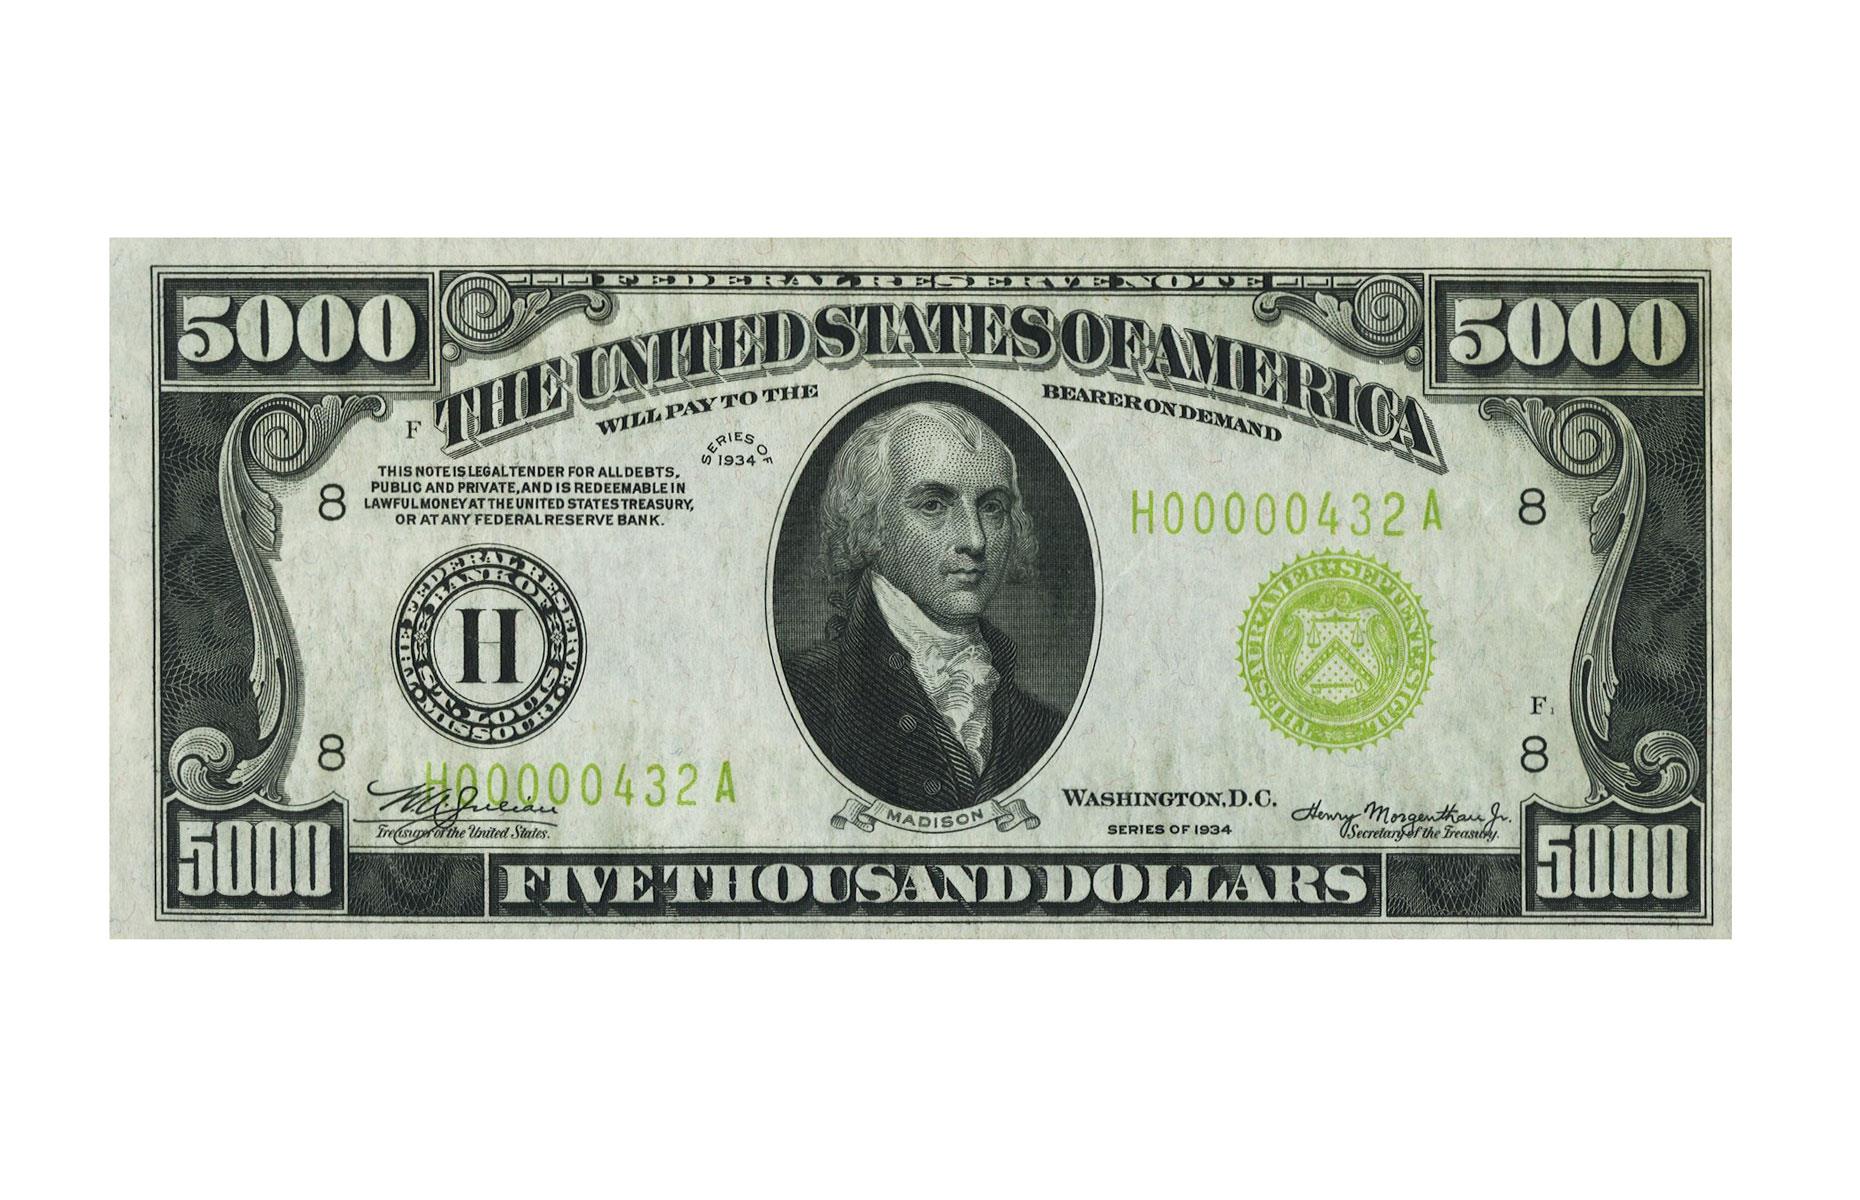 USA 1934 Fr. 2221-H $5,000 Federal Reserve Note – $141,000 (£113k)